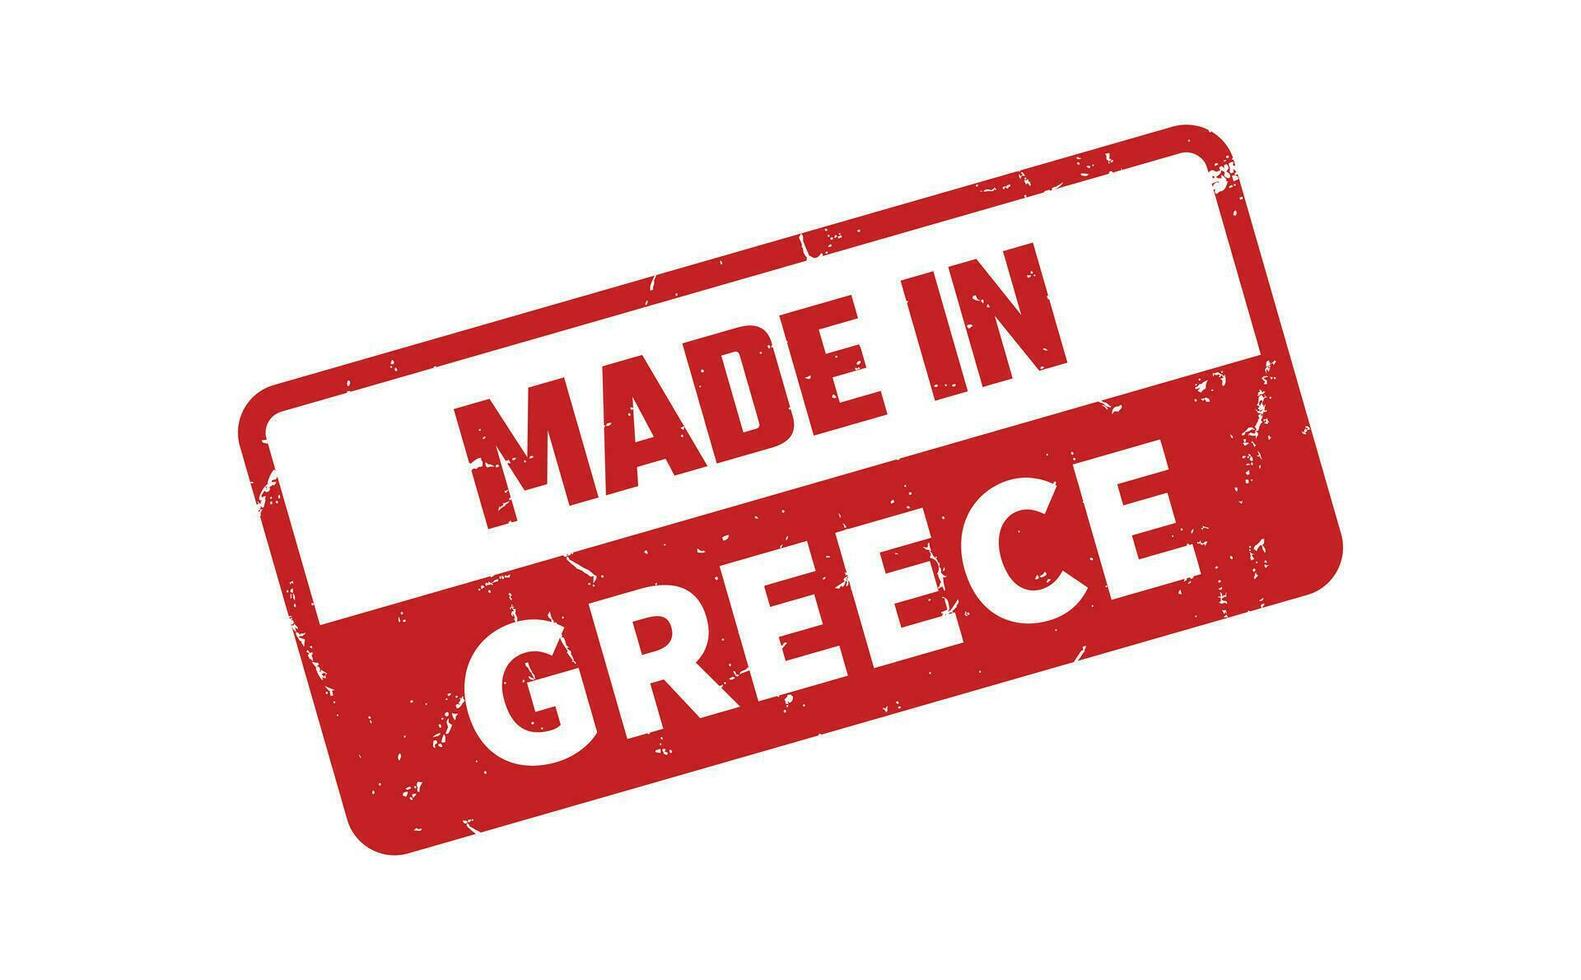 Made In Greece Rubber Stamp vector